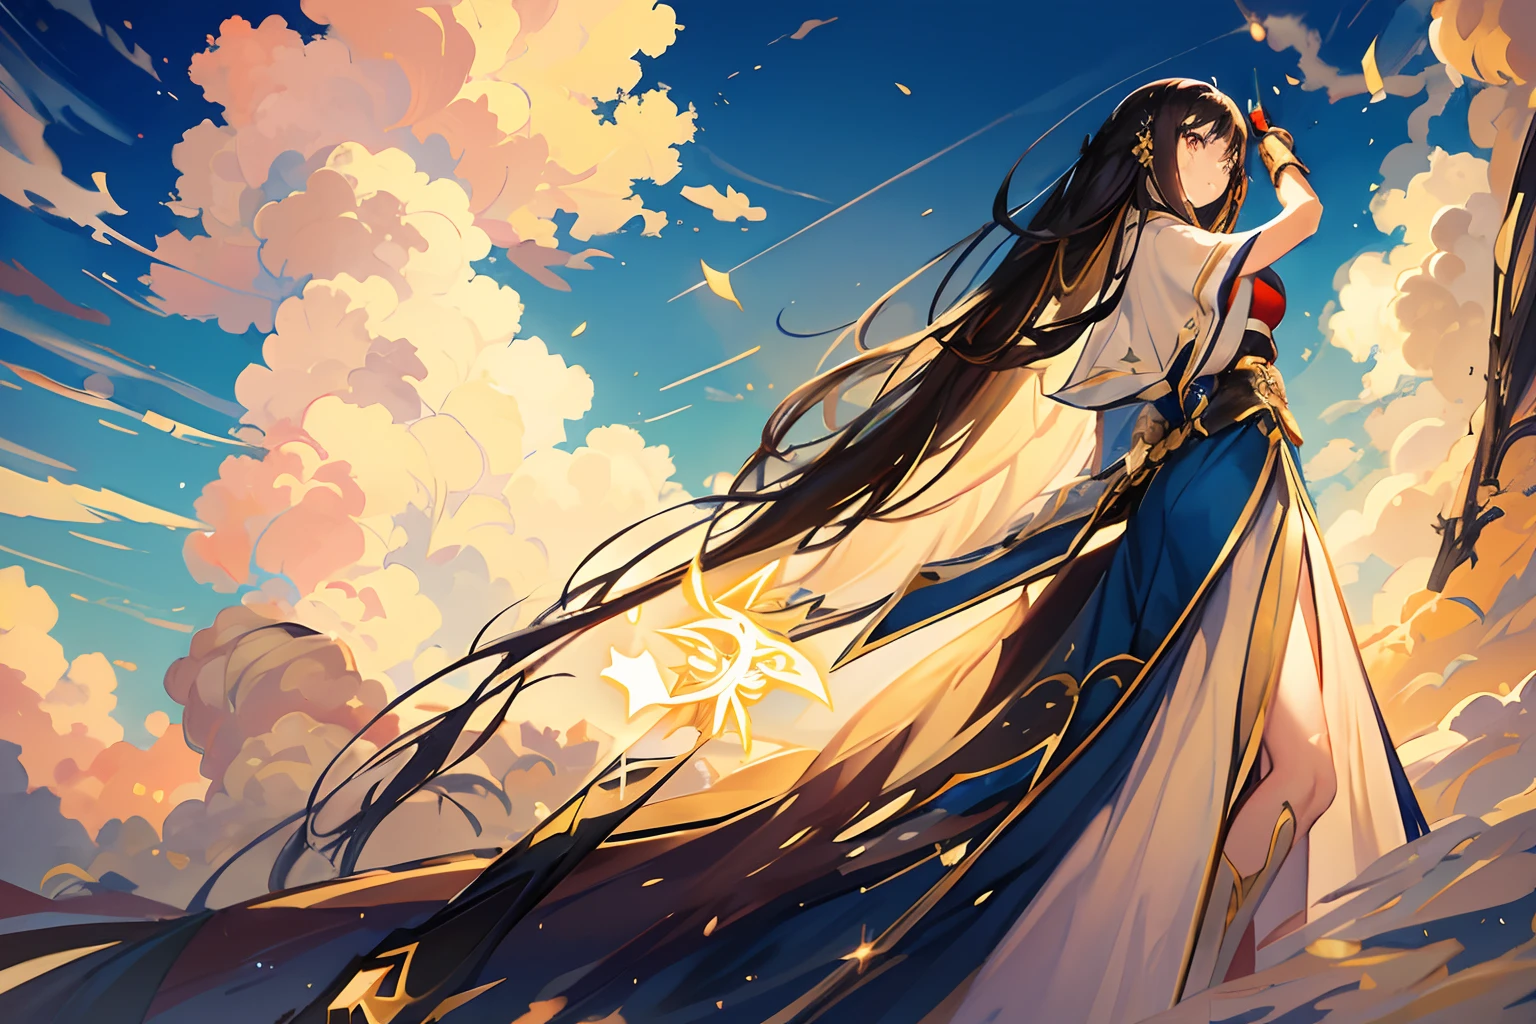 Long black hair, brown starry eyes, white Chinese swordswoman dress, futuristic sword with golden hilt radiating glowing shapes, blue sky and cloud background, beautiful detailed anime girl face